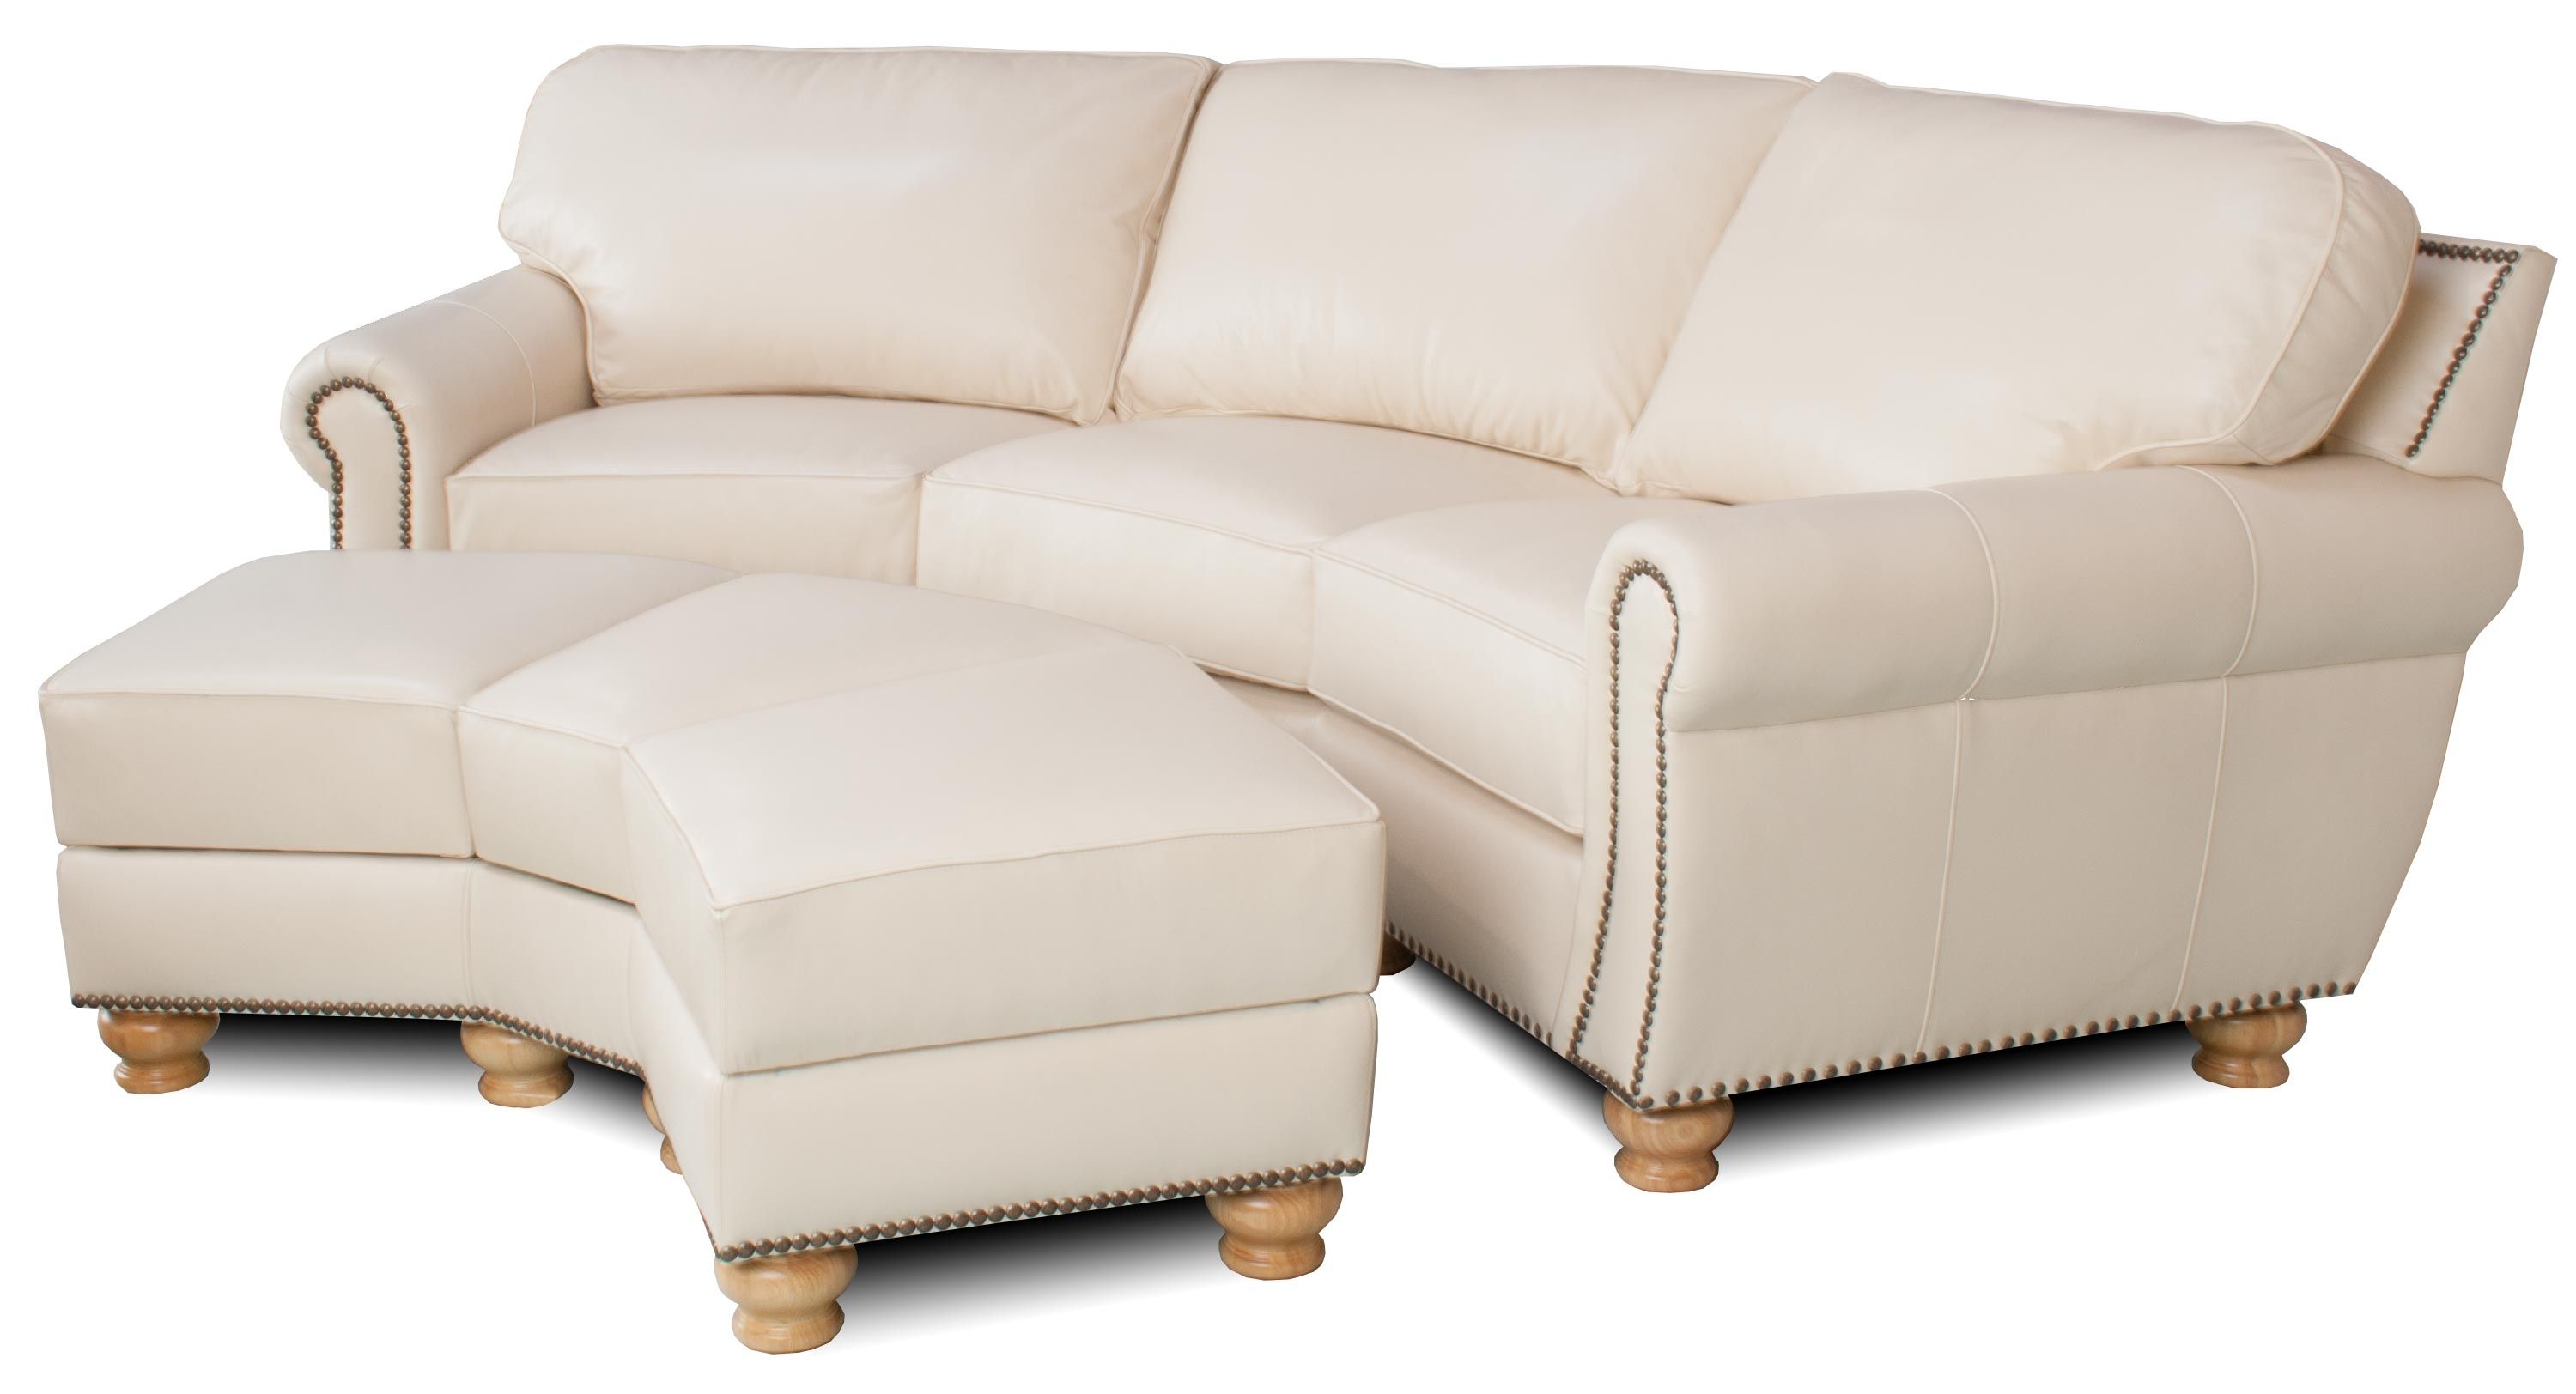 45 Degree Angle Sectional Sofa For 45 Degree Sectional Sofa (Photo 1 of 15)